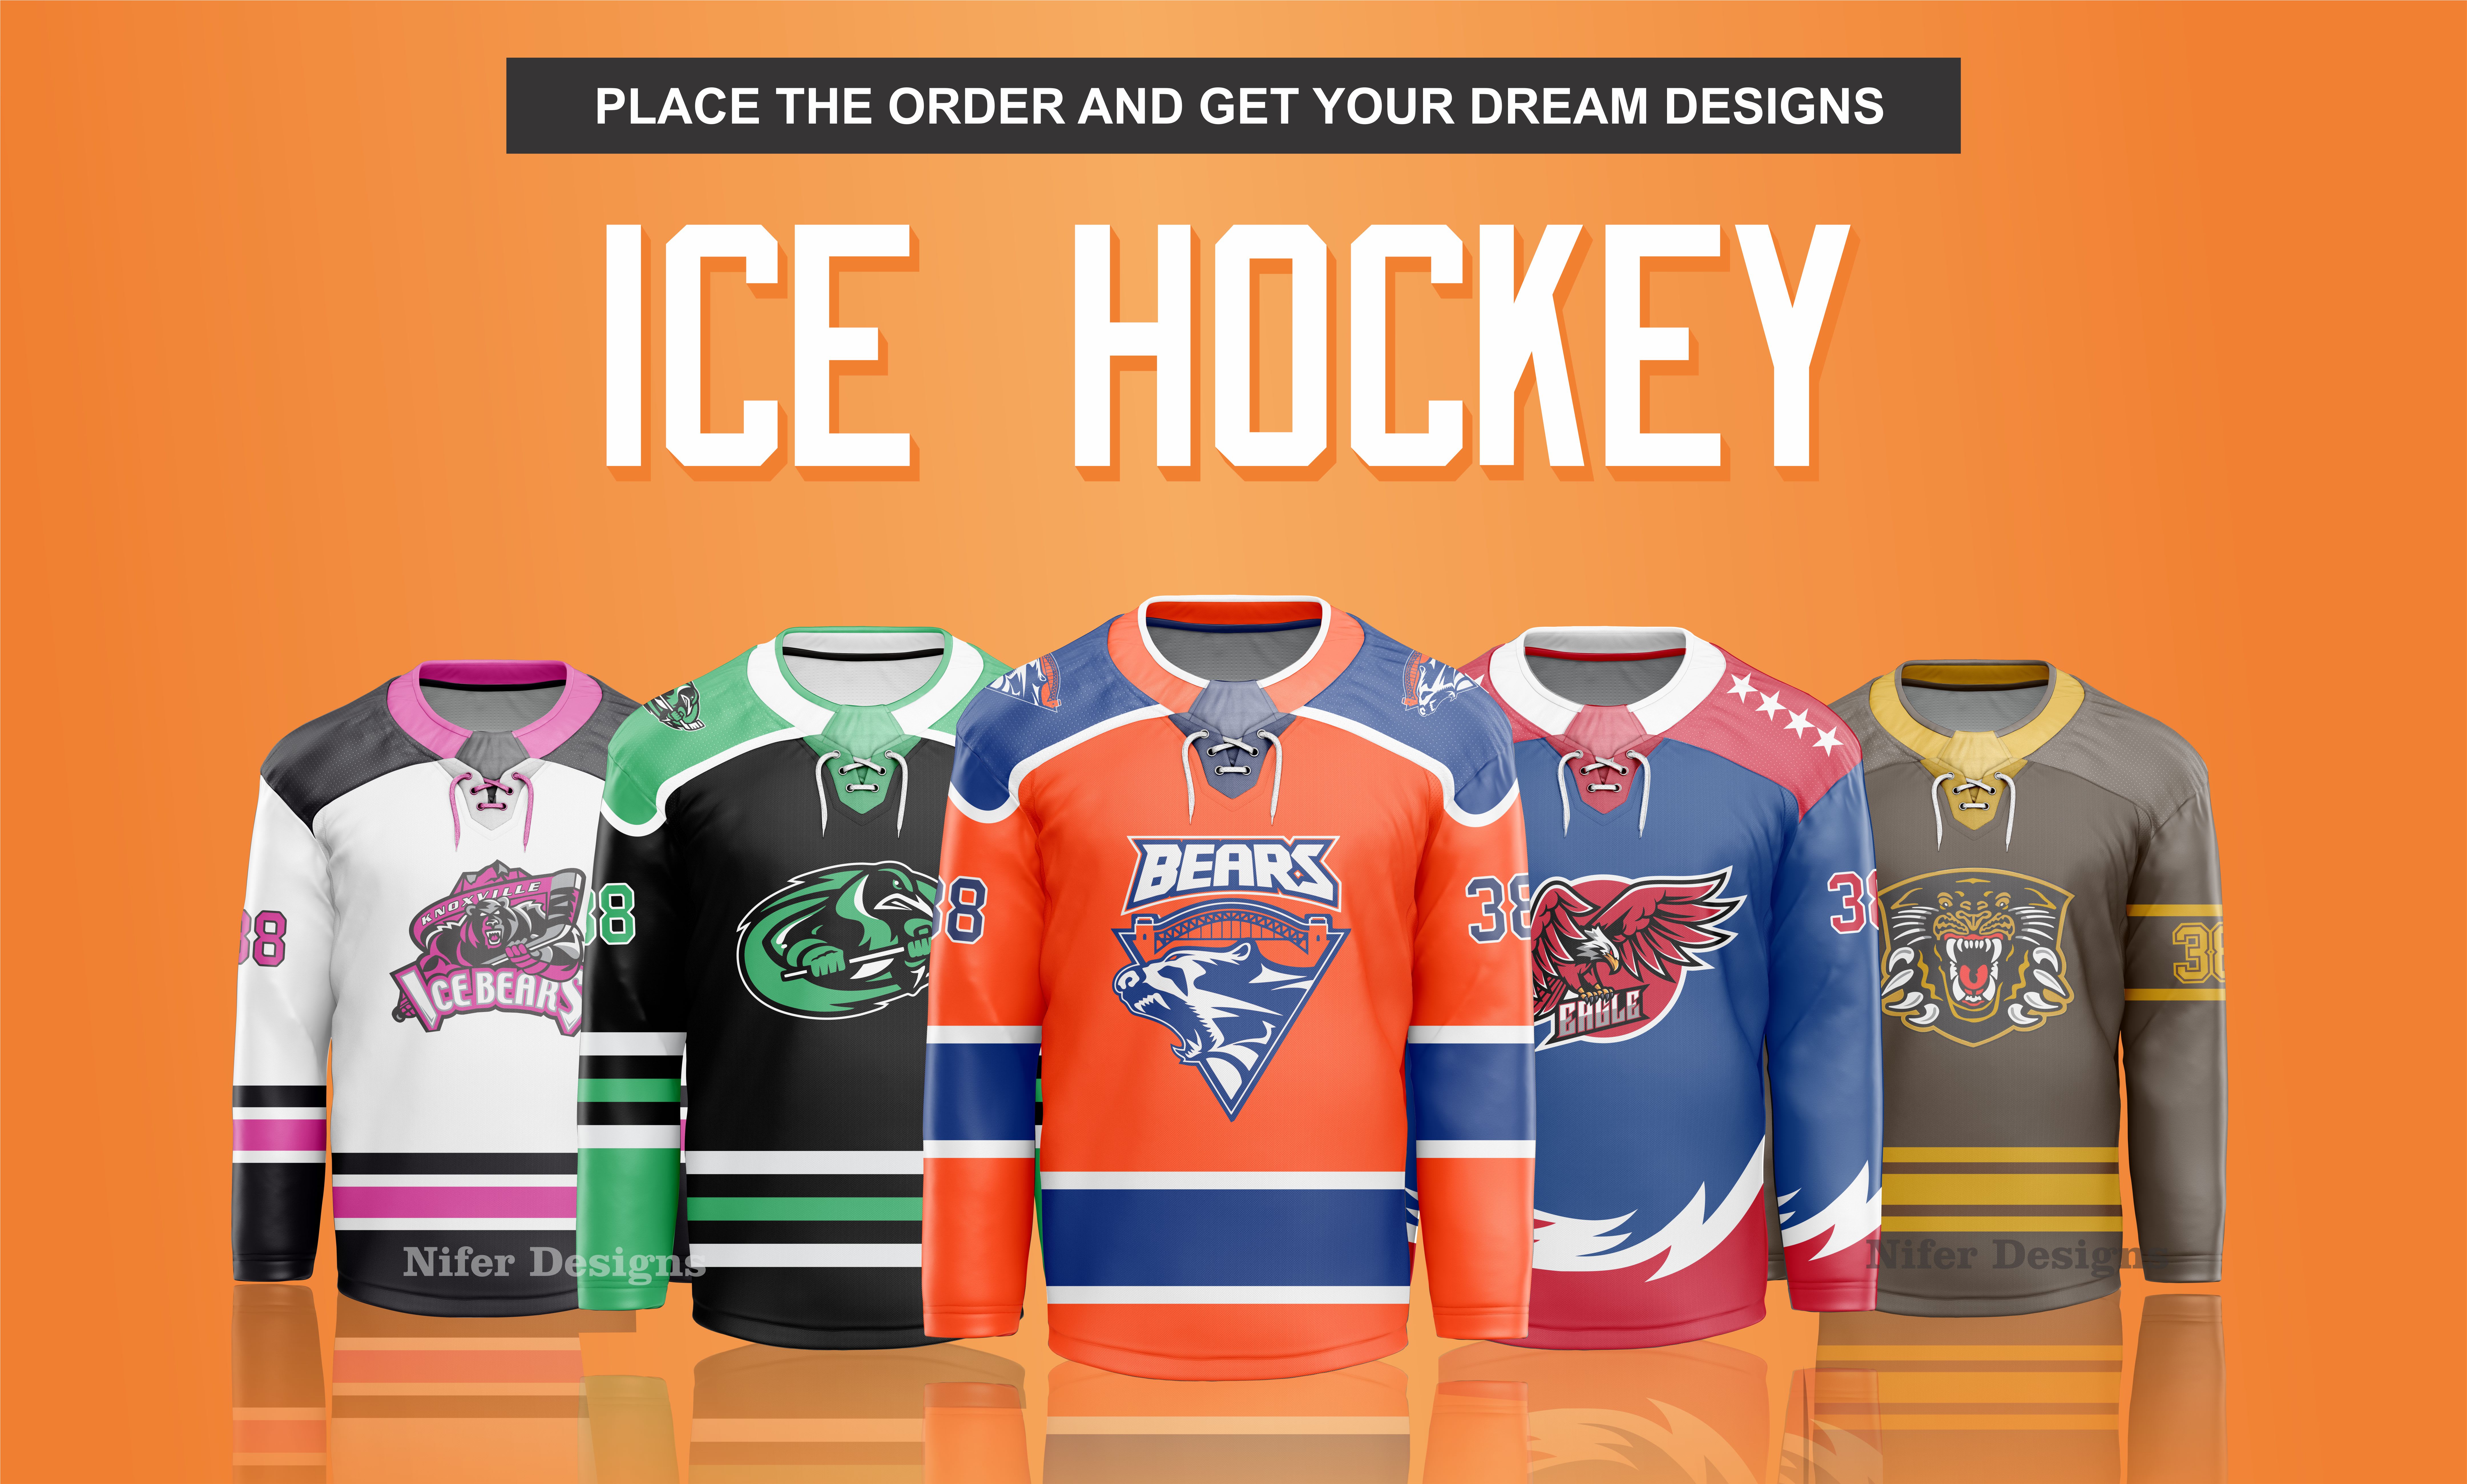 I will design custom ice hockey jersey and sports jersey for $20